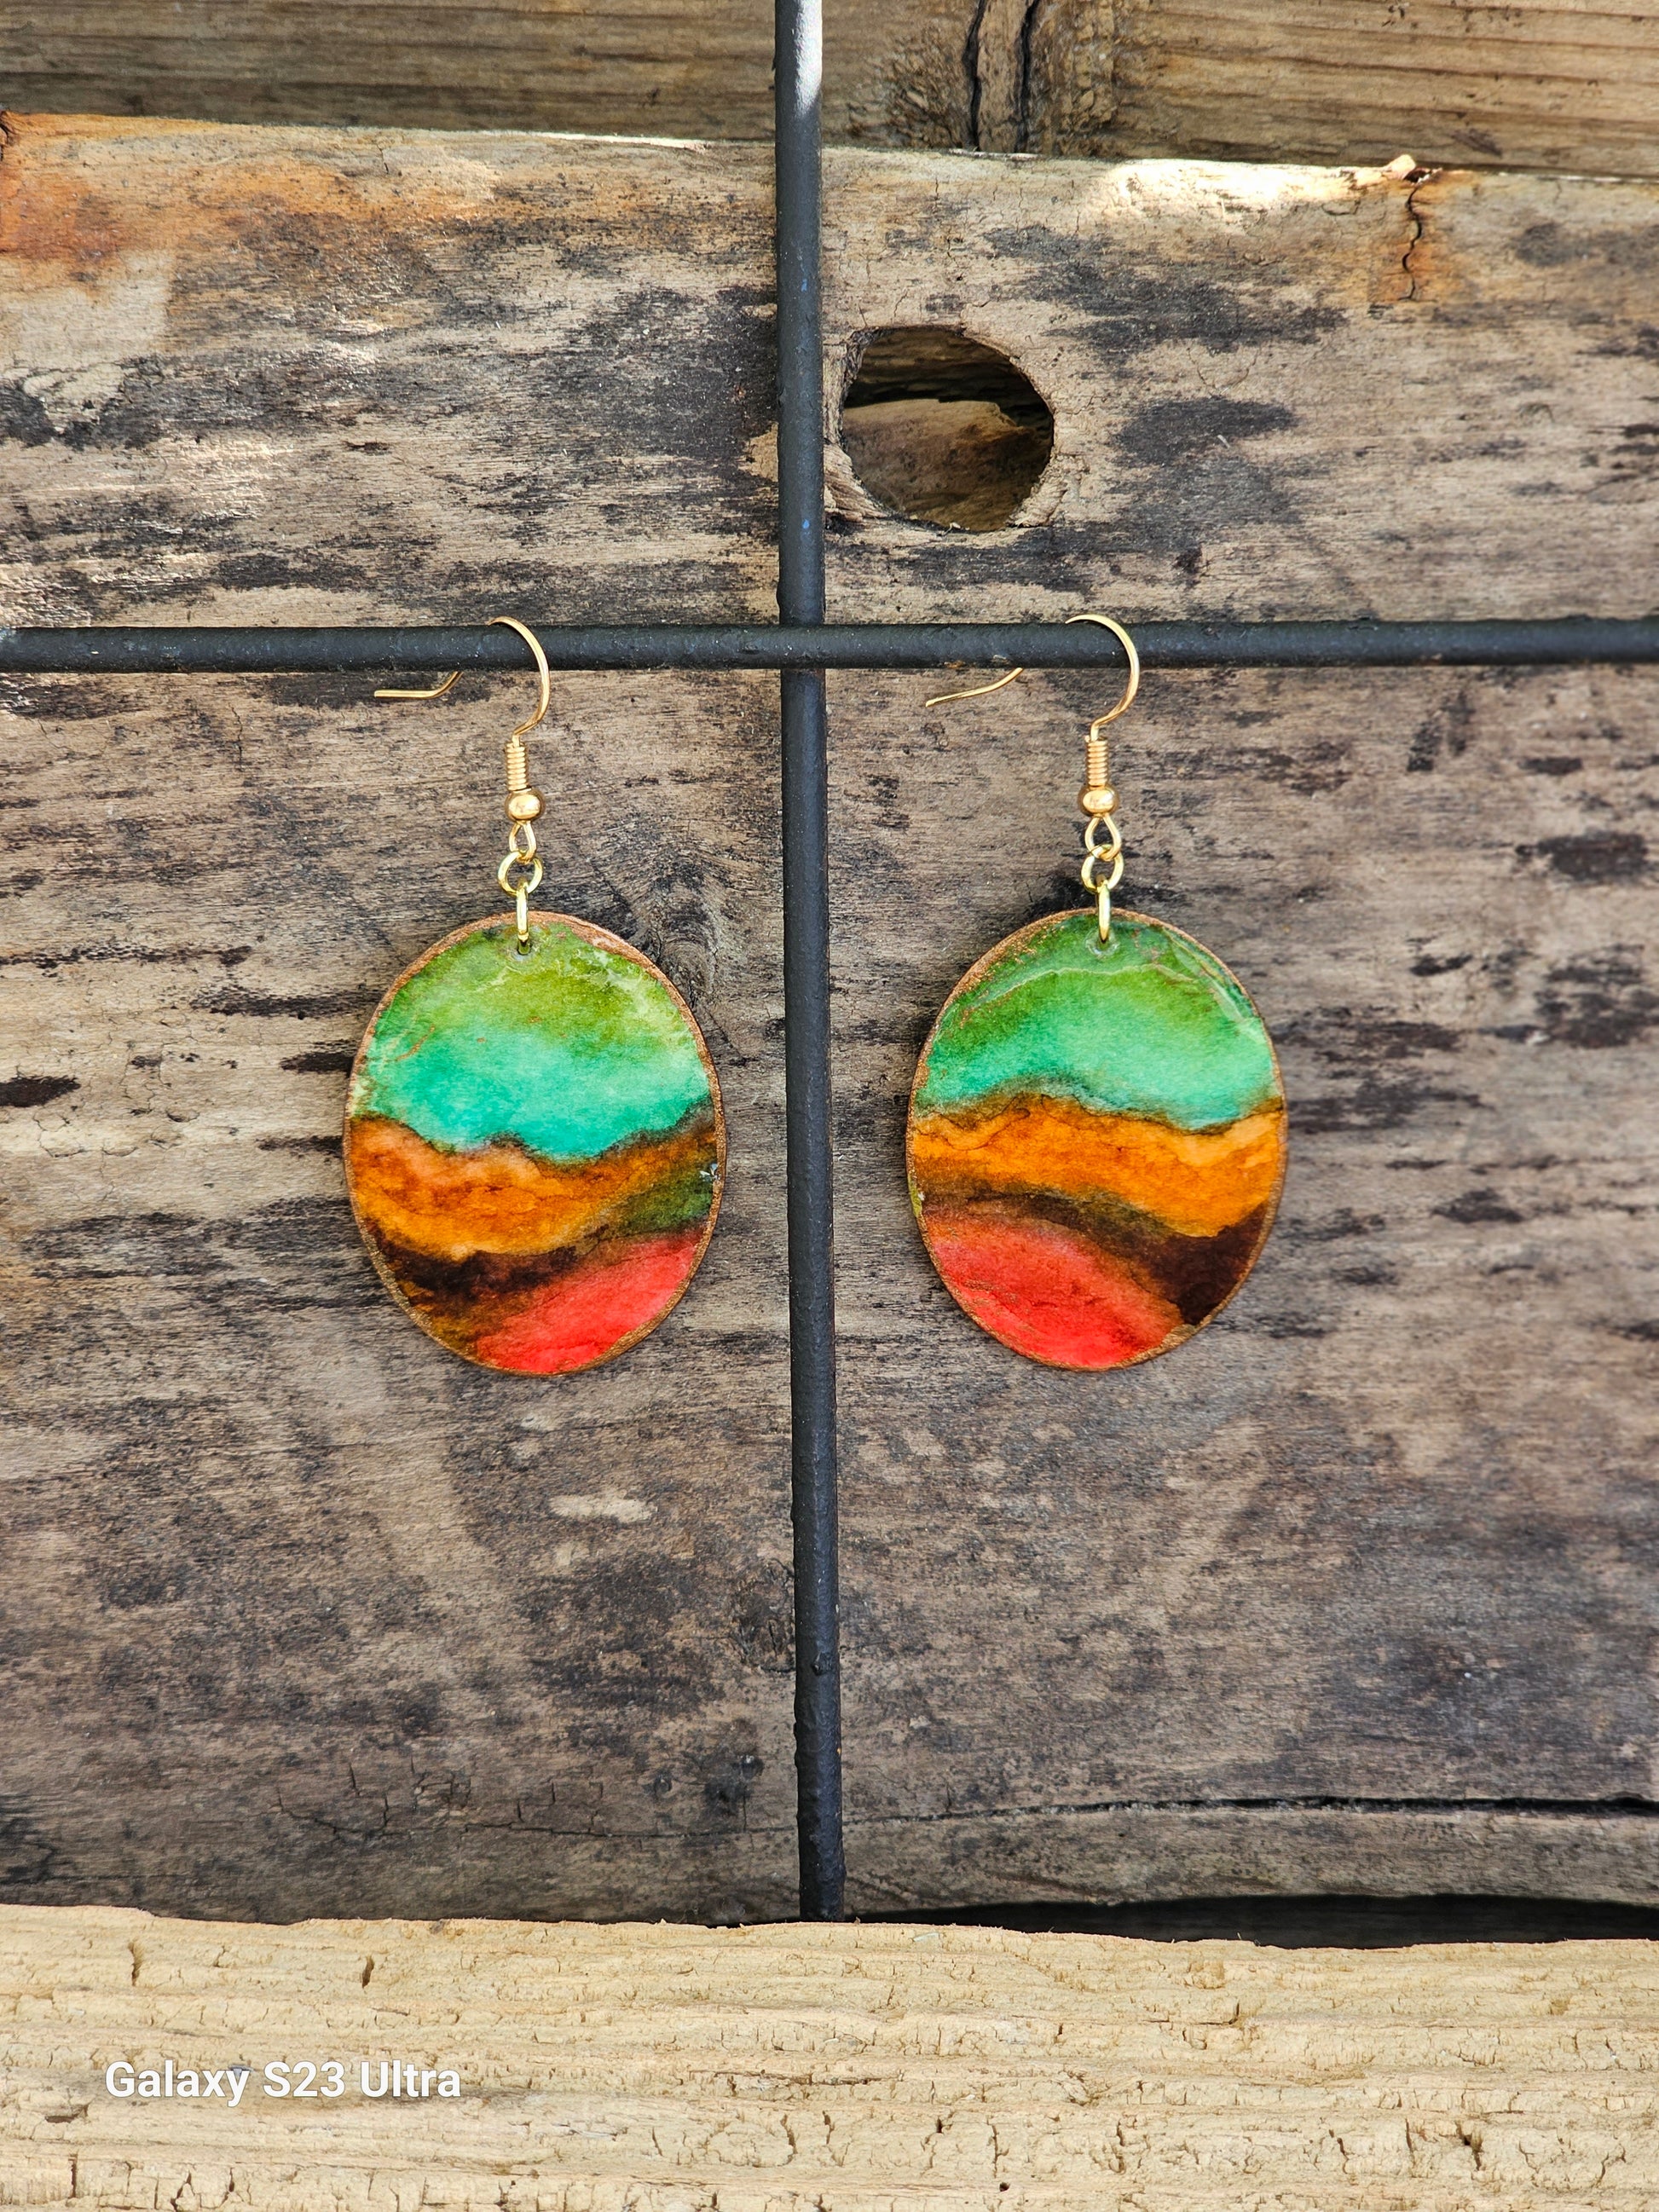 Hand painted Watercolor Desert View Nature scape. Ultra lightweight paper earrings. Teal blue, orange, red and brown background landscape.  Edged in golds. Back is painted in complimentary color. Oval in shape. 14kg over sterling silver findings. Hangs 1 3/4" in Length